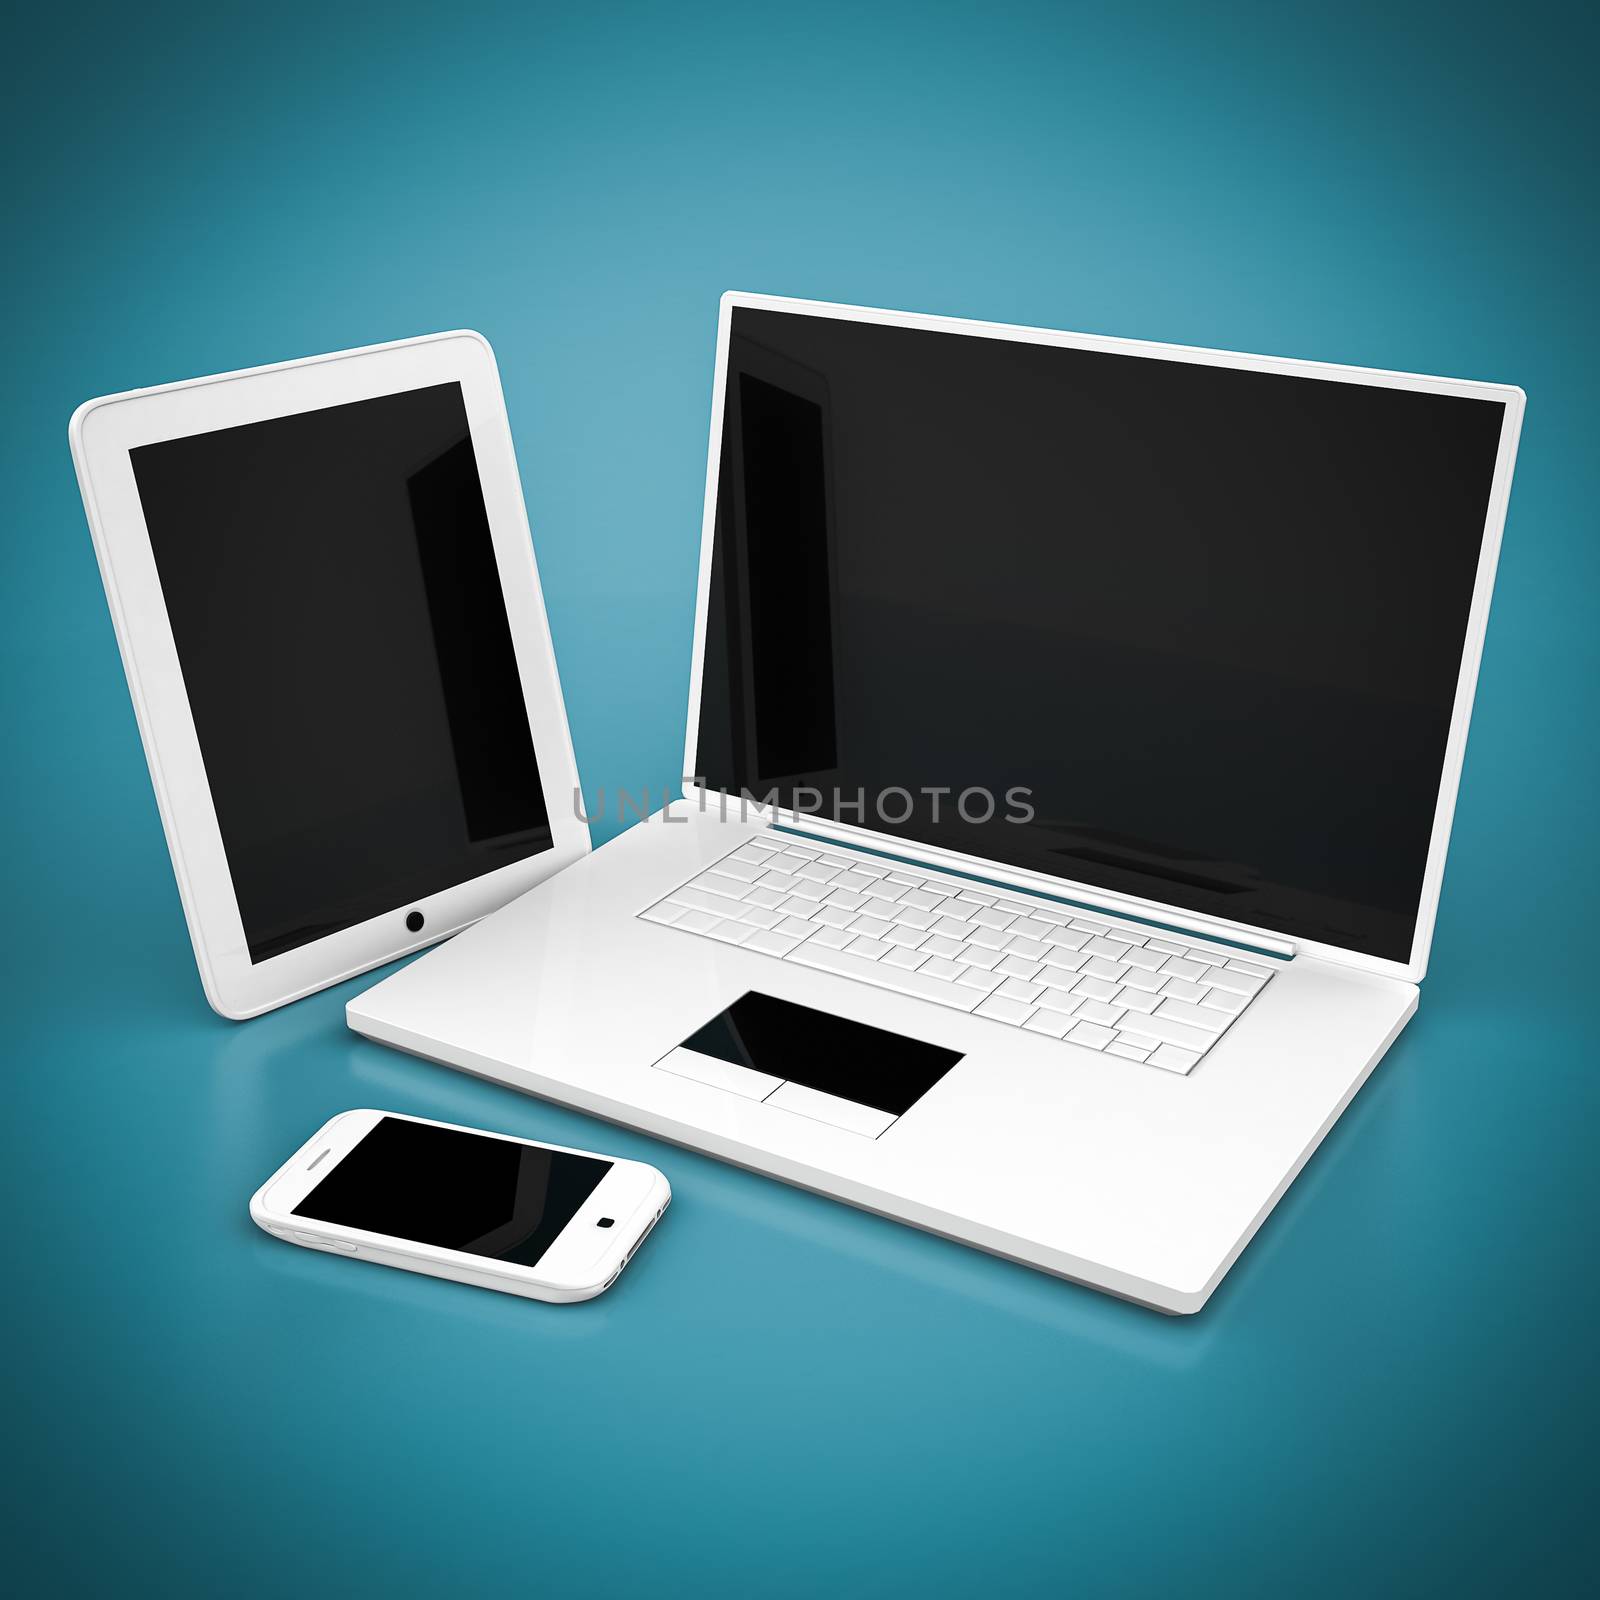 Laptop, tablet and smartphone on a blue background